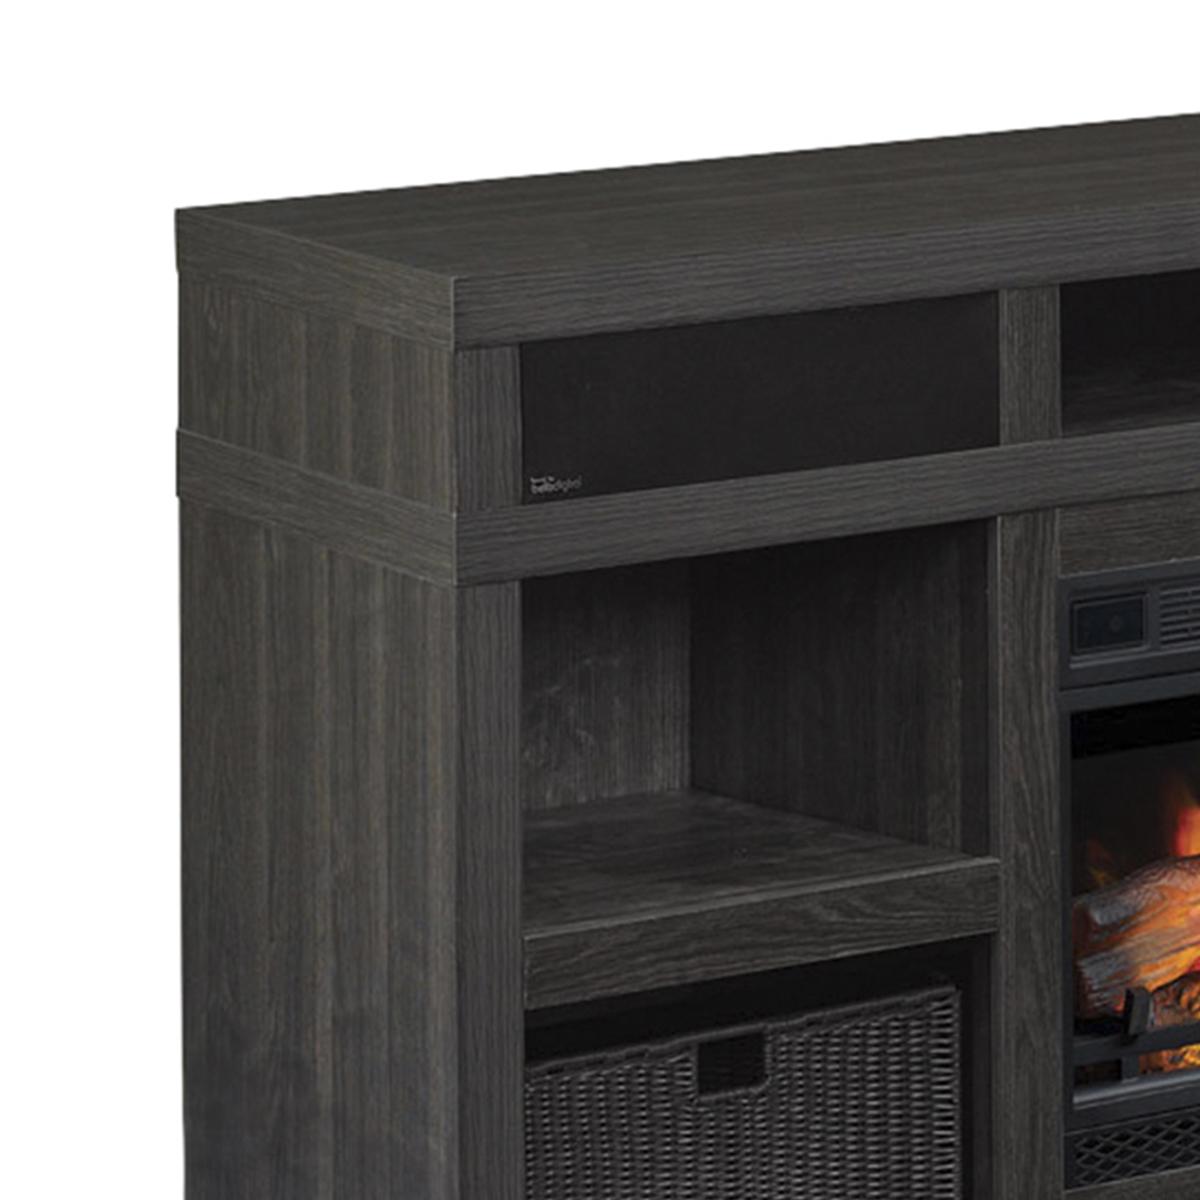 Gray Entertainment Center with Fireplace Beautiful Fabio Flames Greatlin 64" Tv Stand In Black Walnut